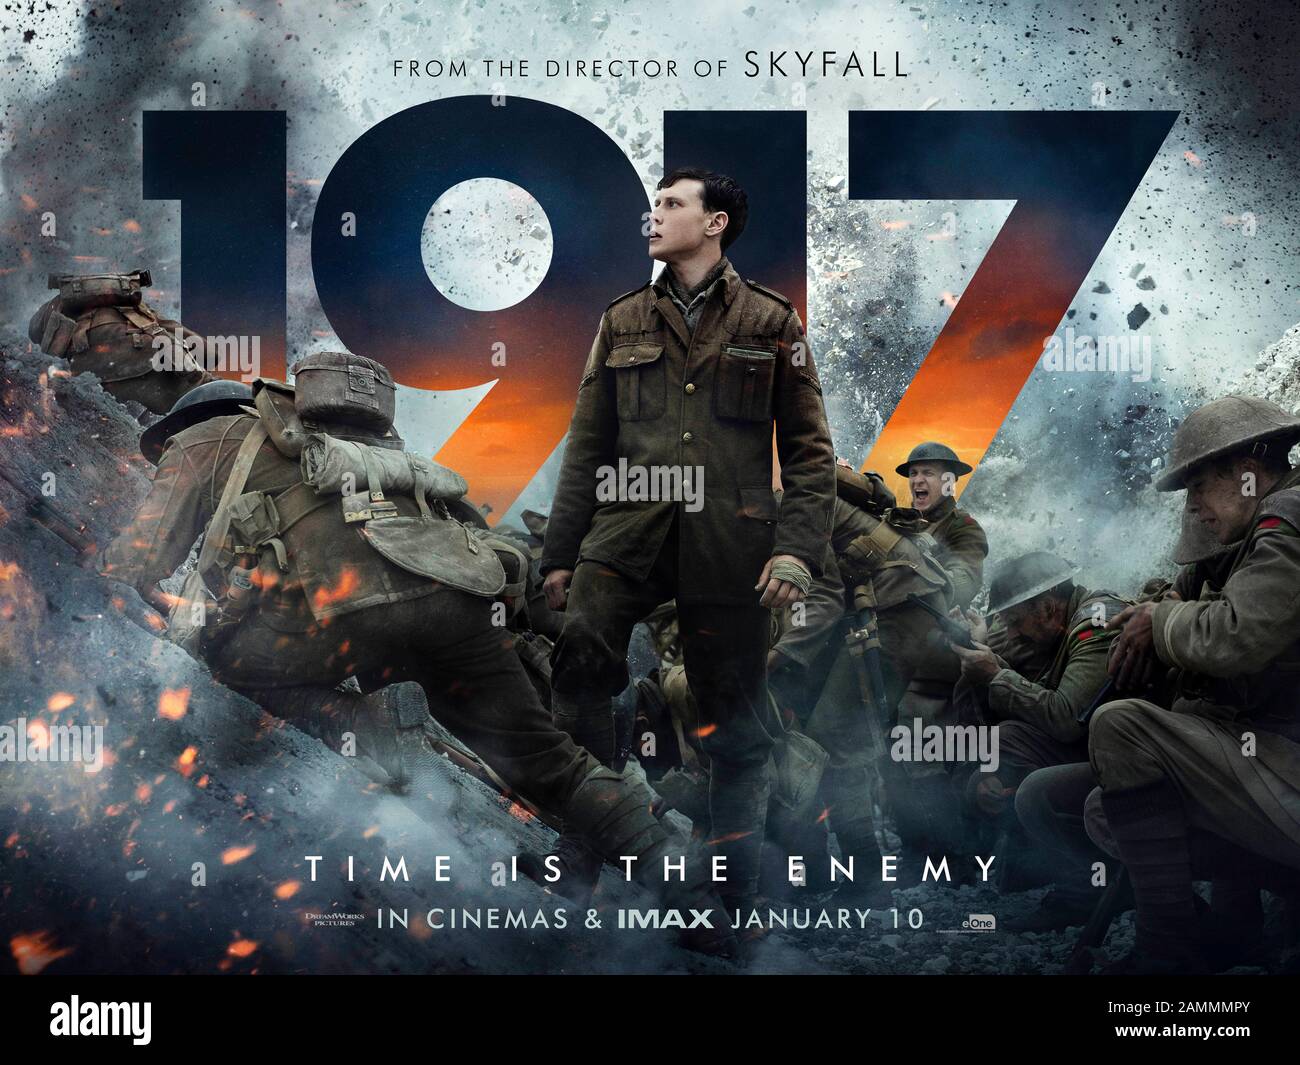 1917 (2019) directed by Sam Mendes and starring Dean-Charles Chapman, George MacKay, Daniel Mays and Colin Firth. Two British soldiers undertake a dangerous mission across enemy territory to deliver a life-saving message. Stock Photo